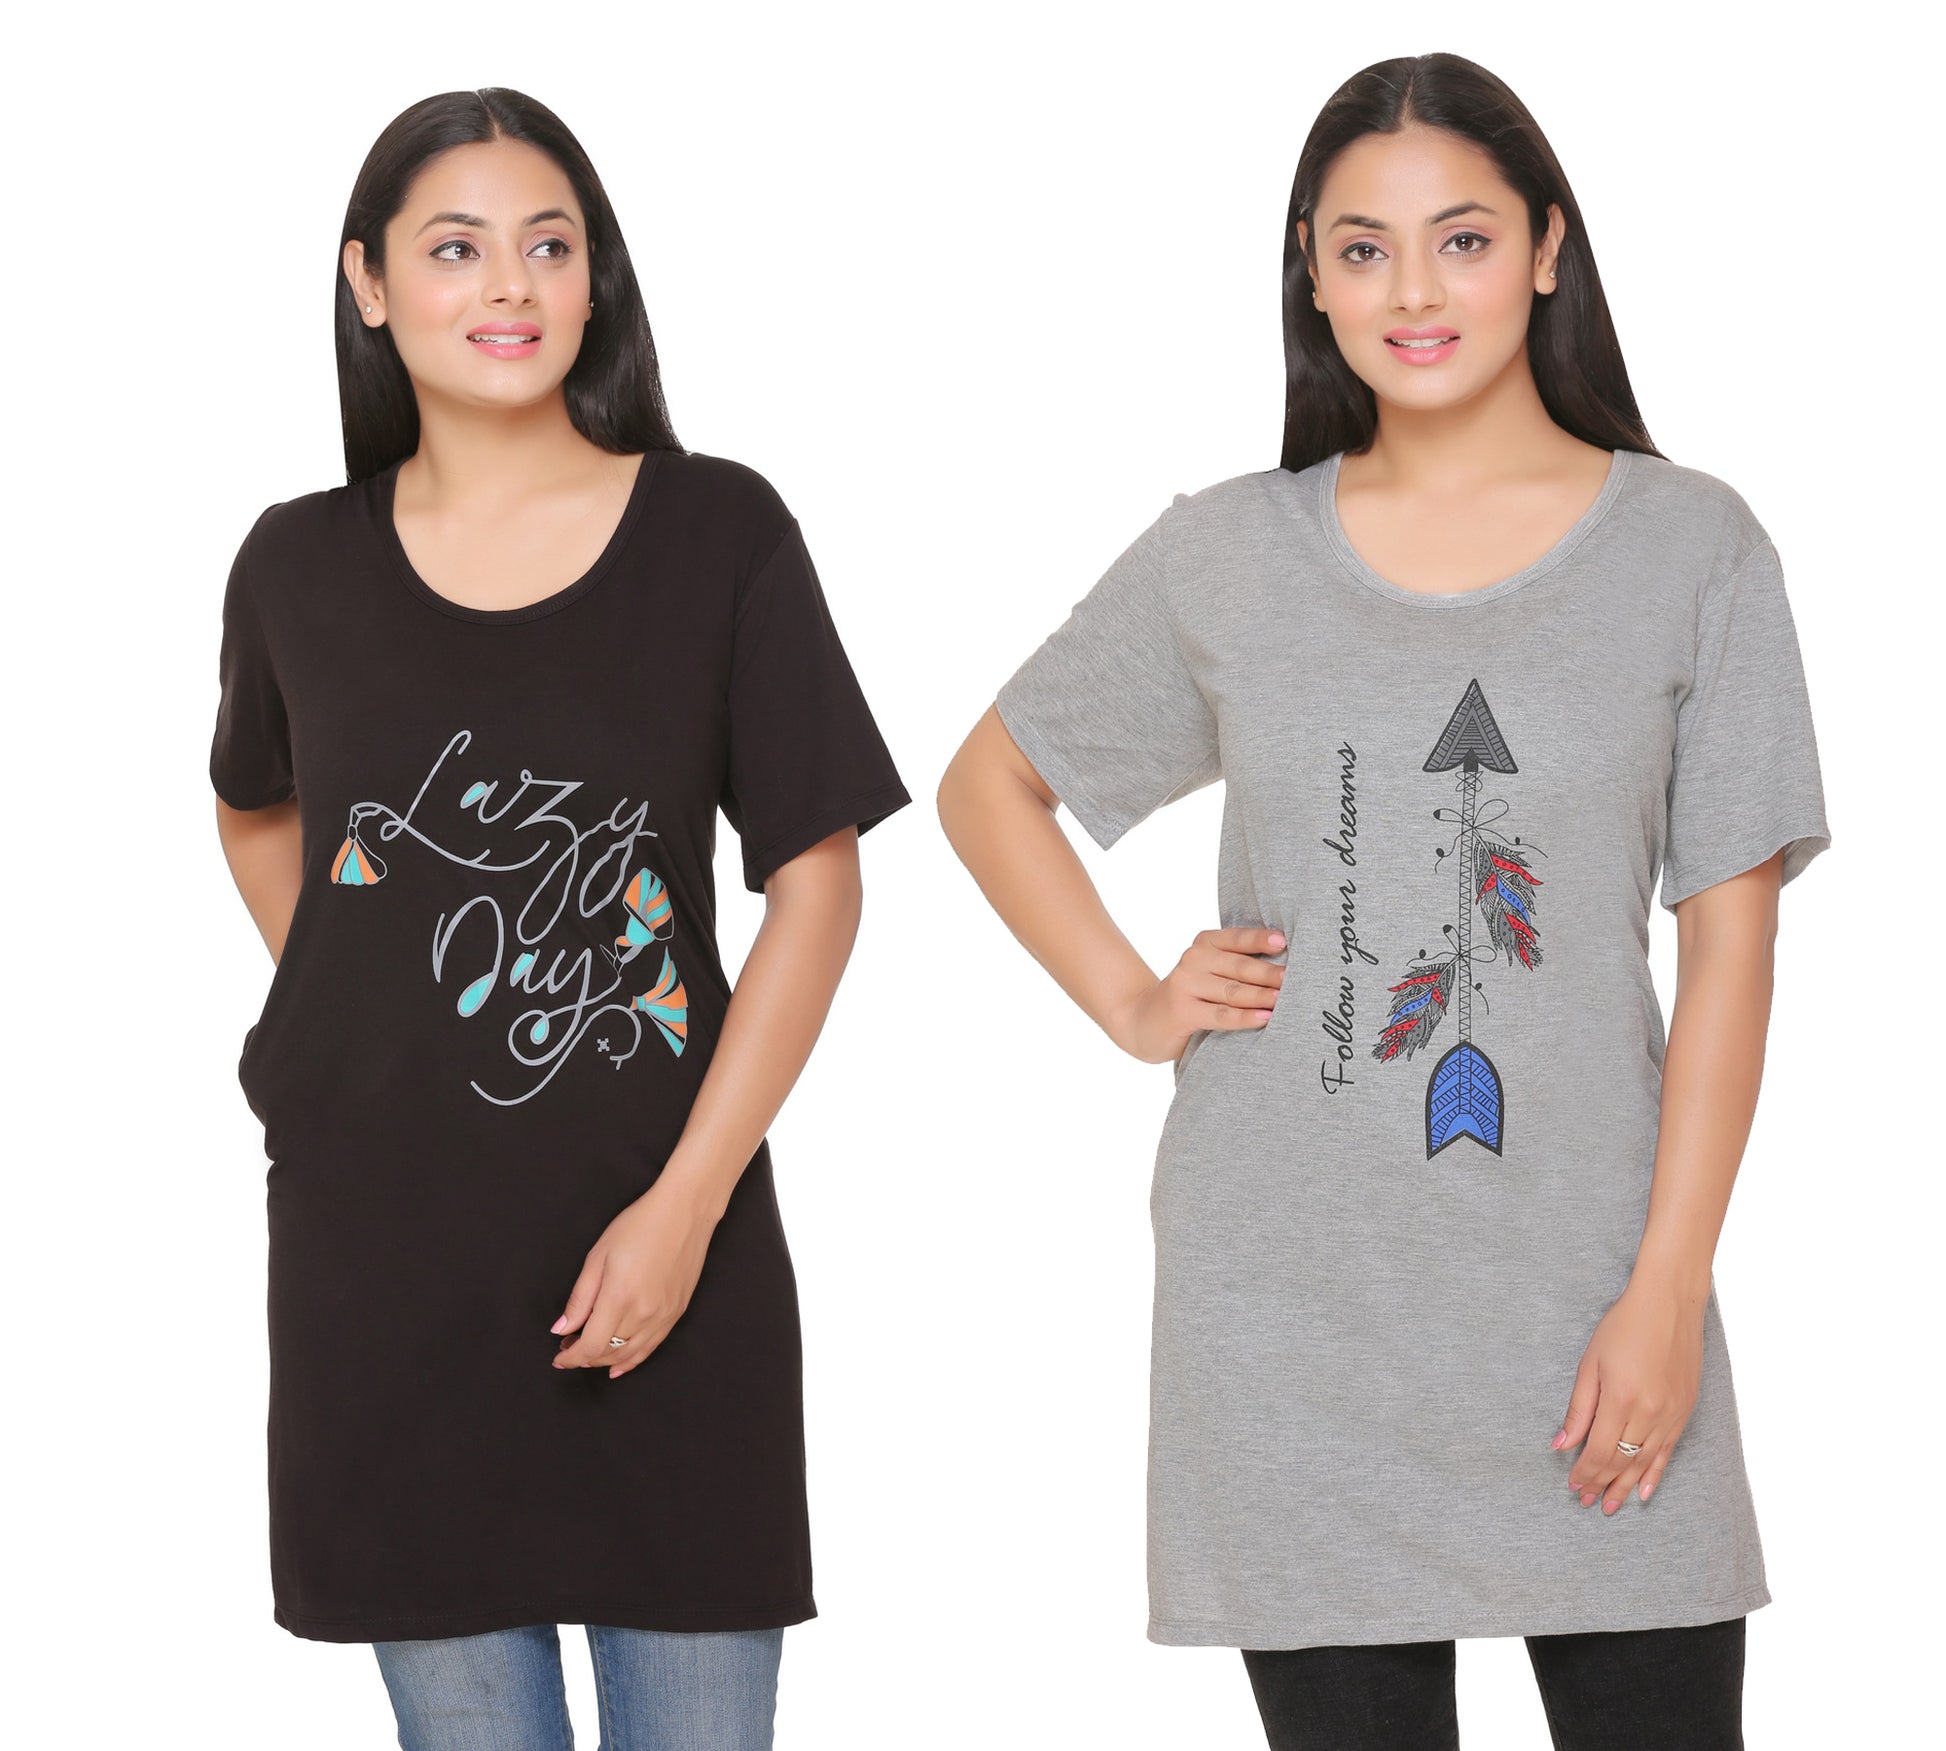 Plus Size Long T-shirts For Women - Half Sleeve - Pack of 2 (Grey & Black) 